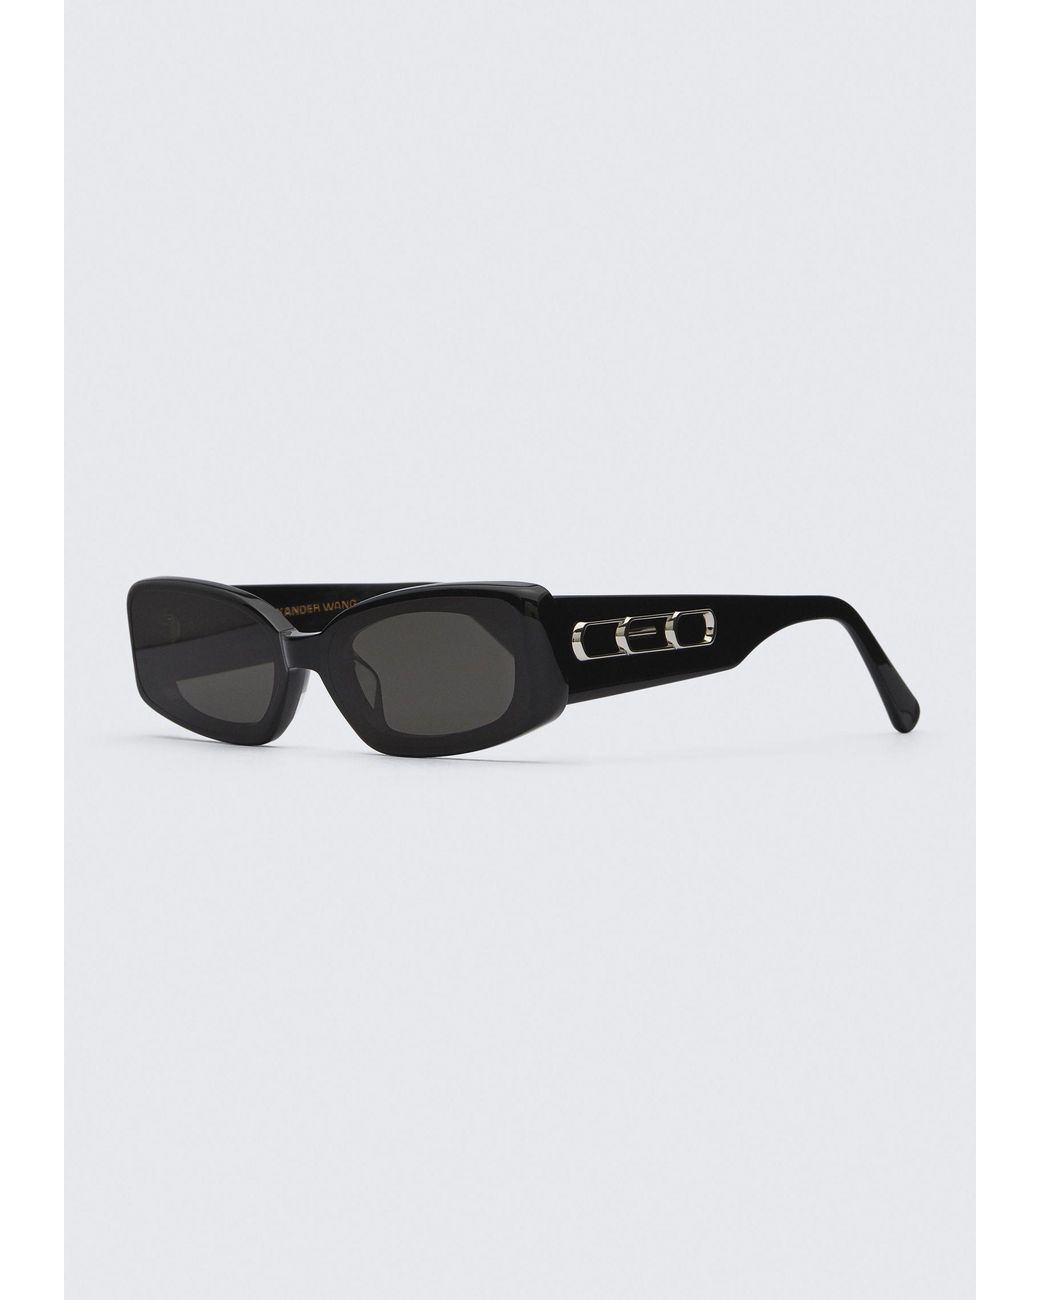 Give Grønland Resignation Alexander Wang Ceo Sunglasses in Black | Lyst